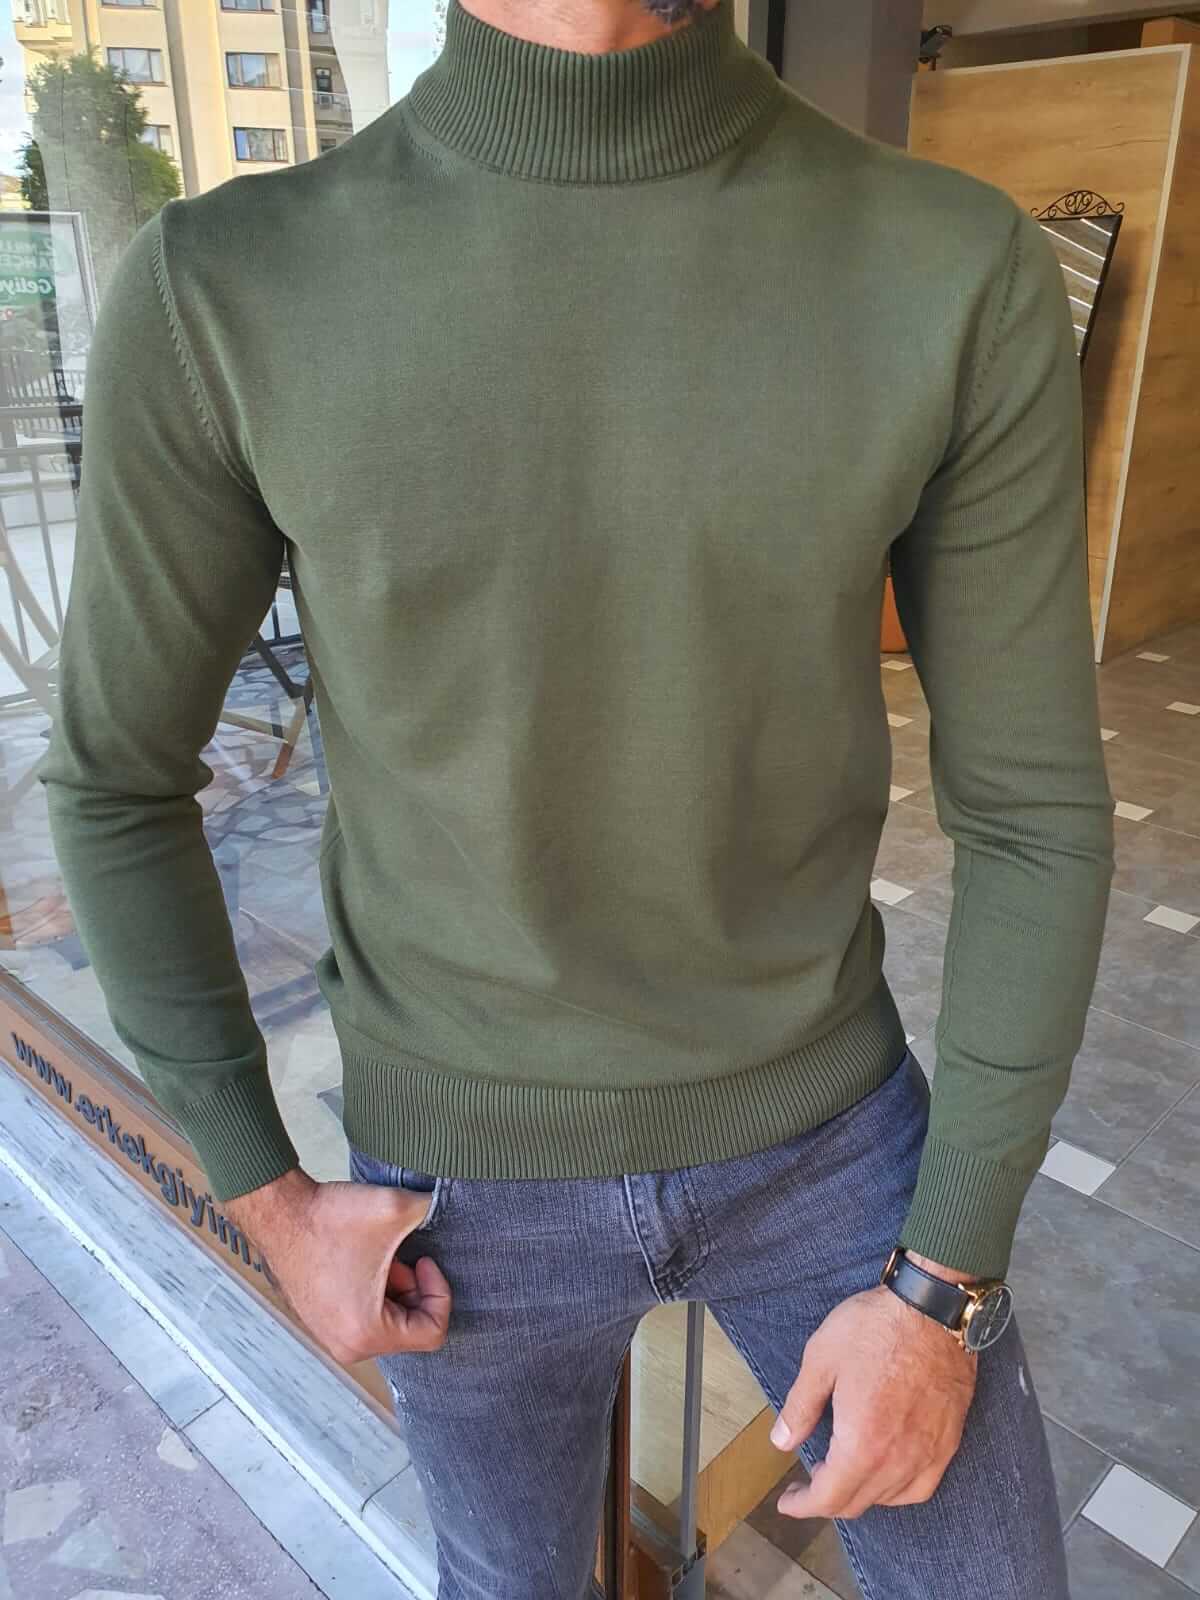 A vibrant Hunza Green Turtleneck sweater made of soft, ribbed fabric. The turtleneck features a snug fit and long sleeves, providing warmth and style.